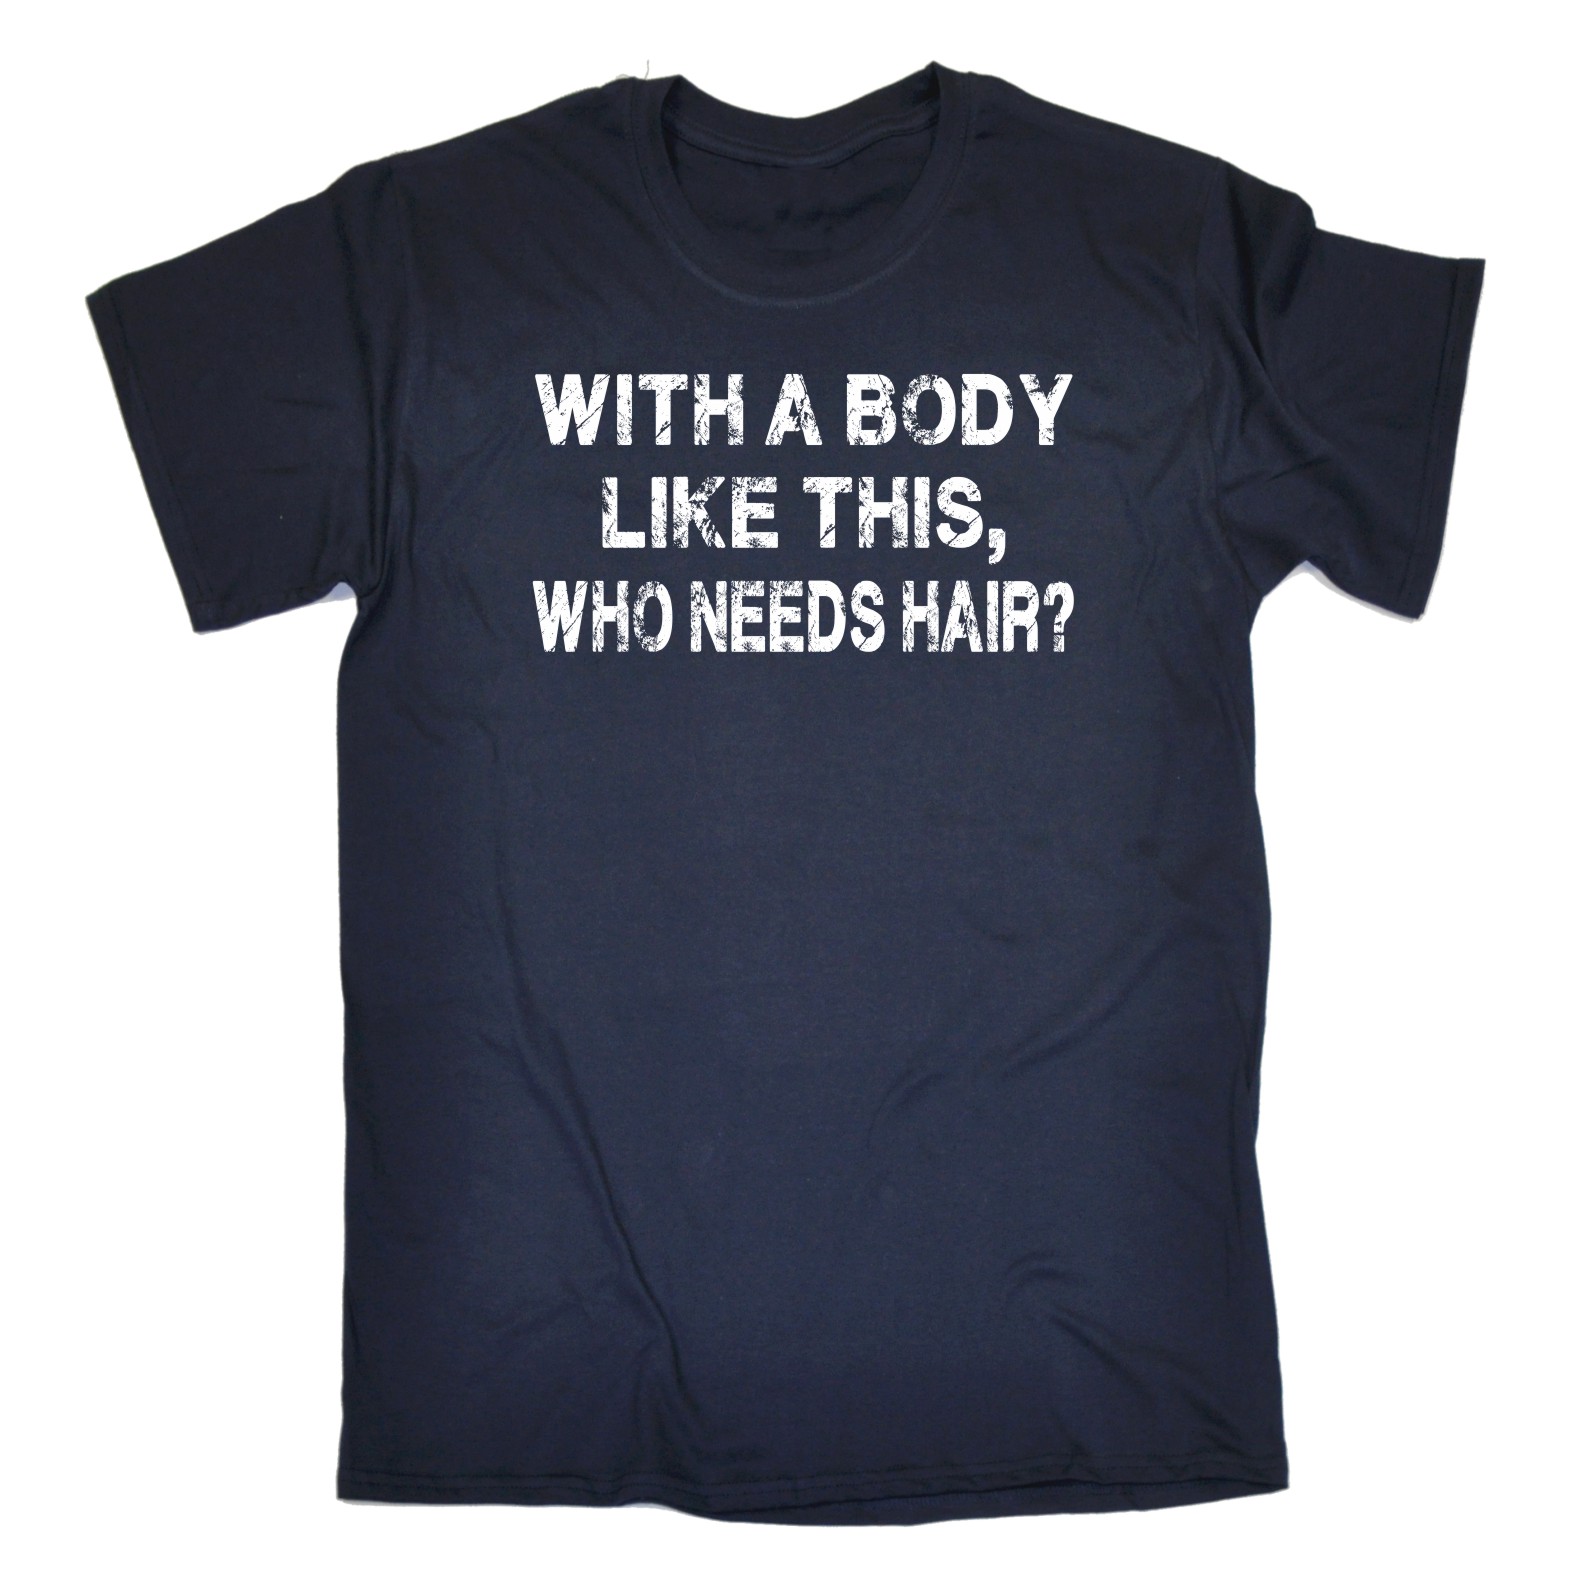 thumbnail 6 - Men&#039;s With A Body Like This Who Needs Hair Funny Joke Humour T-SHIRT Birthday